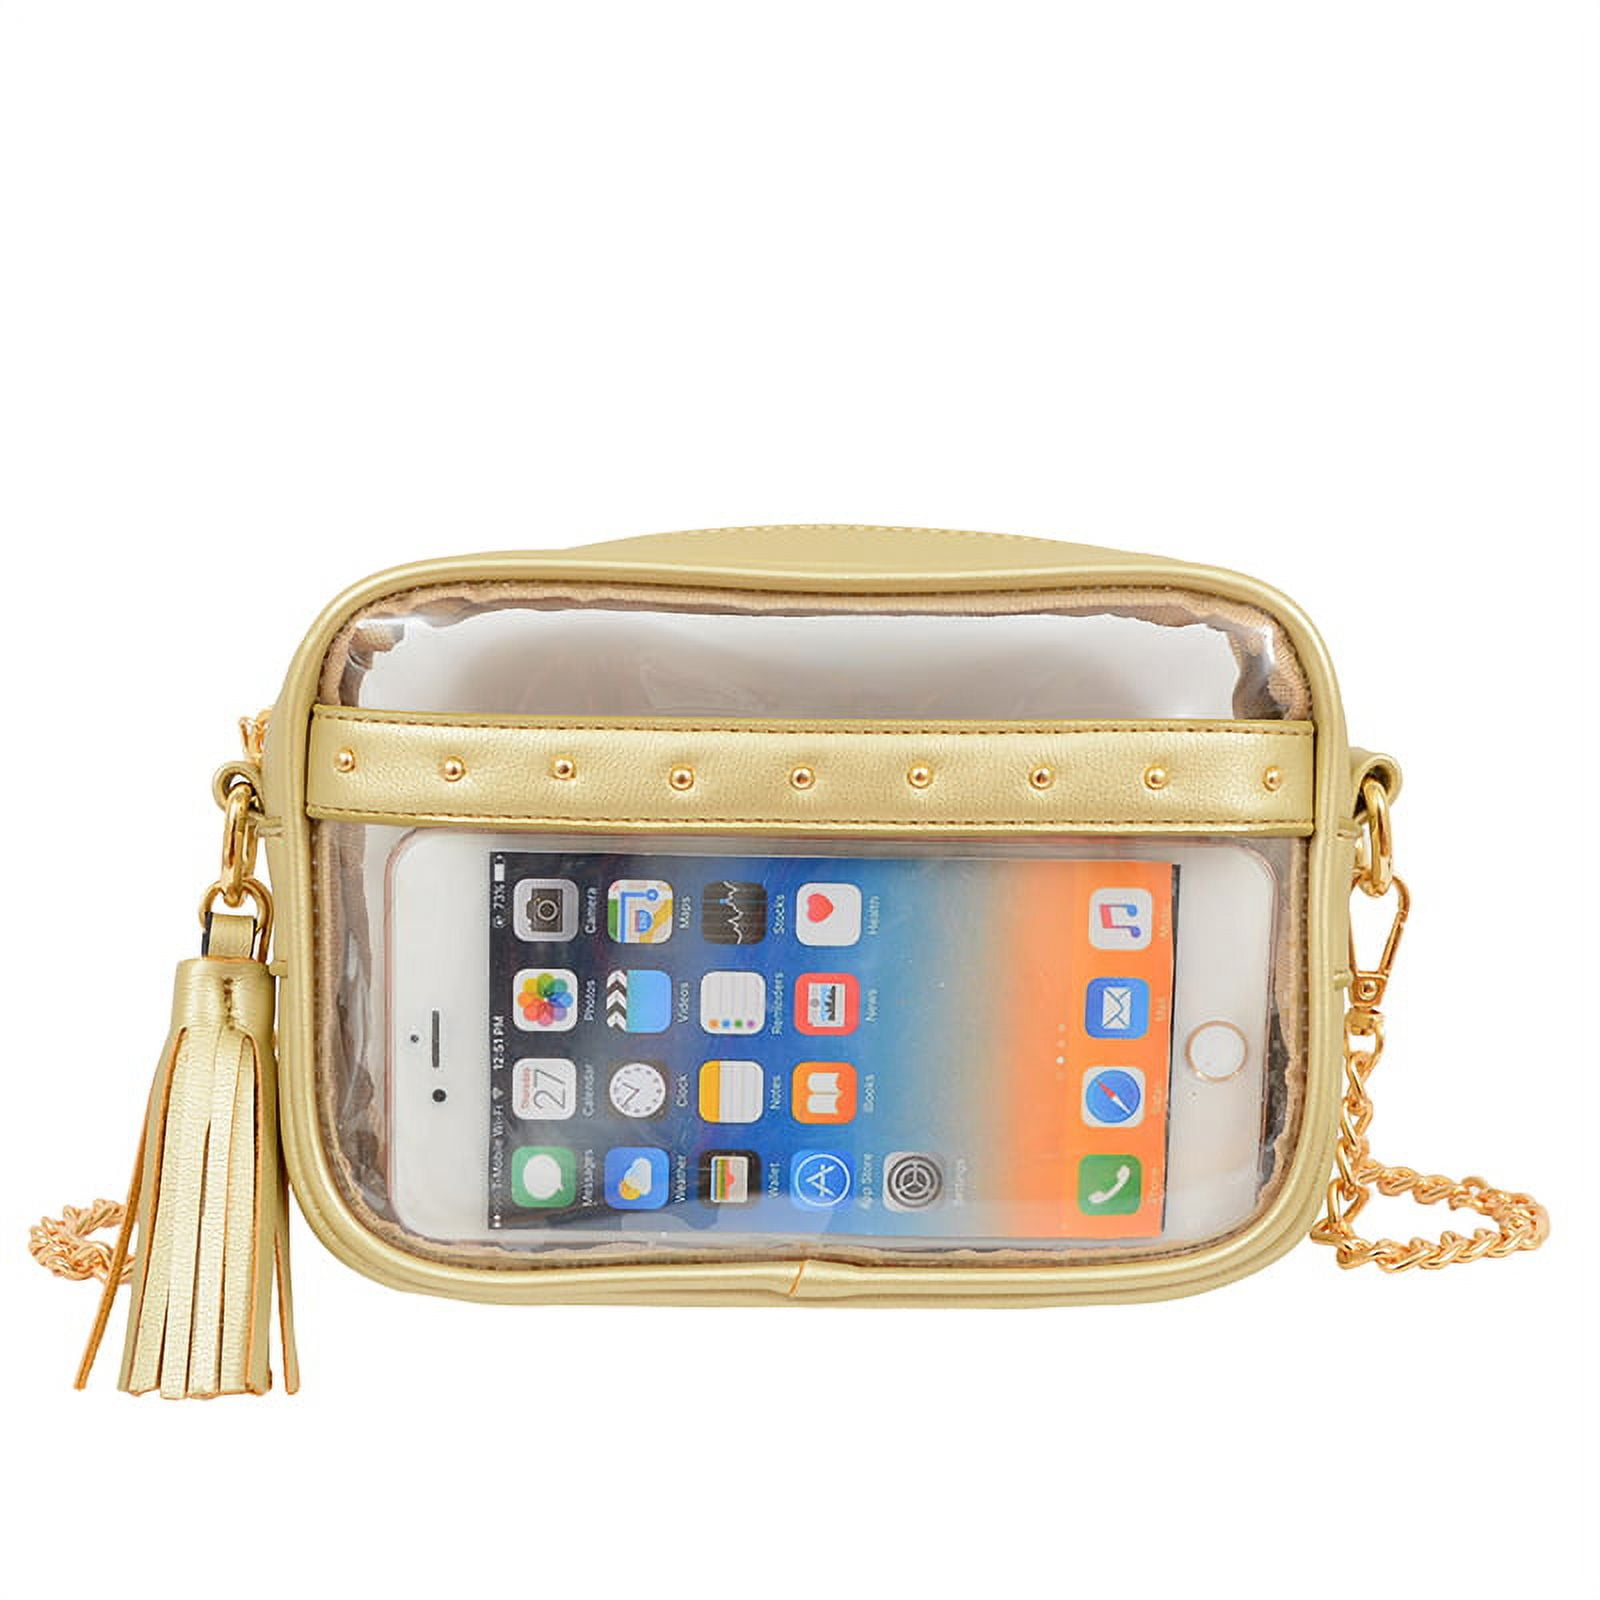 HOXIS Clear PVC Small Crossbody Bag for Stadium Approved Womens Purse Transparent Shoulder Bag Cell Phone Pouch